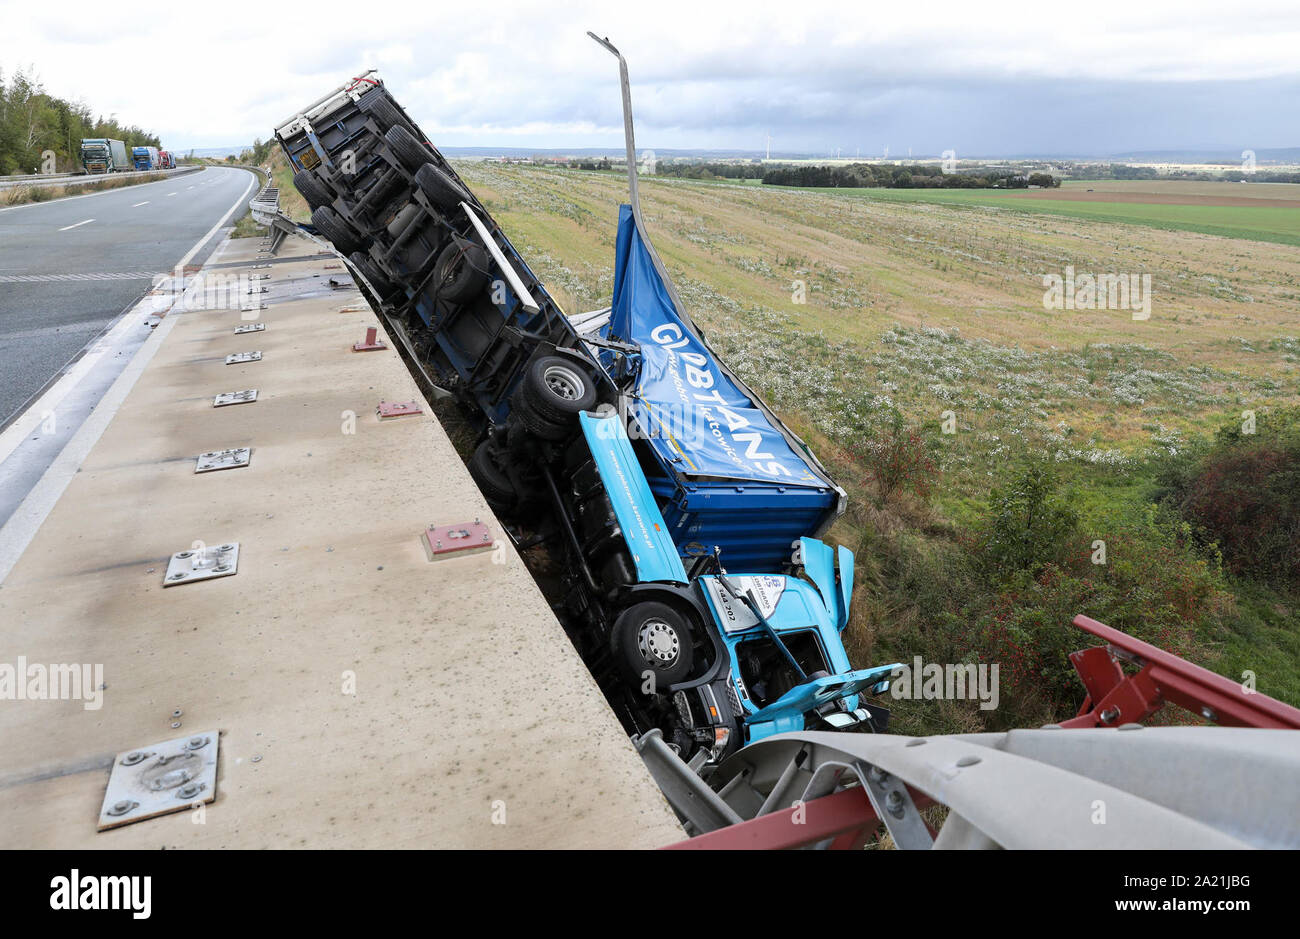 30 September 2019 Saxony Lobau An Injured Truck Lies Next To A Bridge On The B178n Between Lobau And Weissenberg The Exact Cause Of The Accident Has Not Yet Been Clarified But